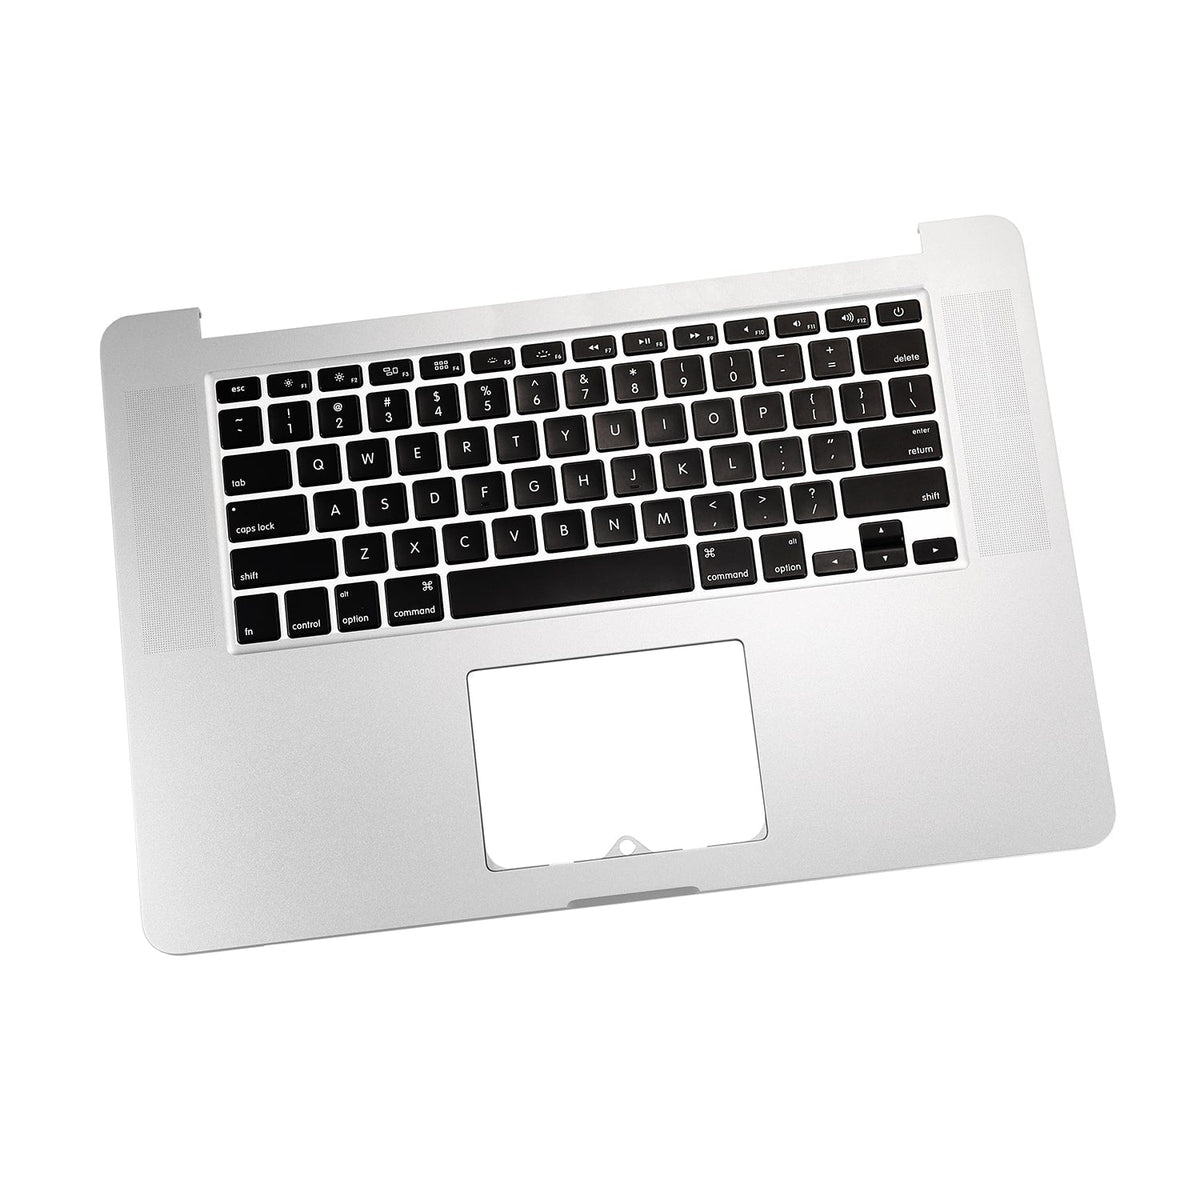 TOP CASE WITH US ENGLISH KEYBOARD FOR MACBOOK PRO RETINA 15" A1398 (MID 2012-EARLY 2013)